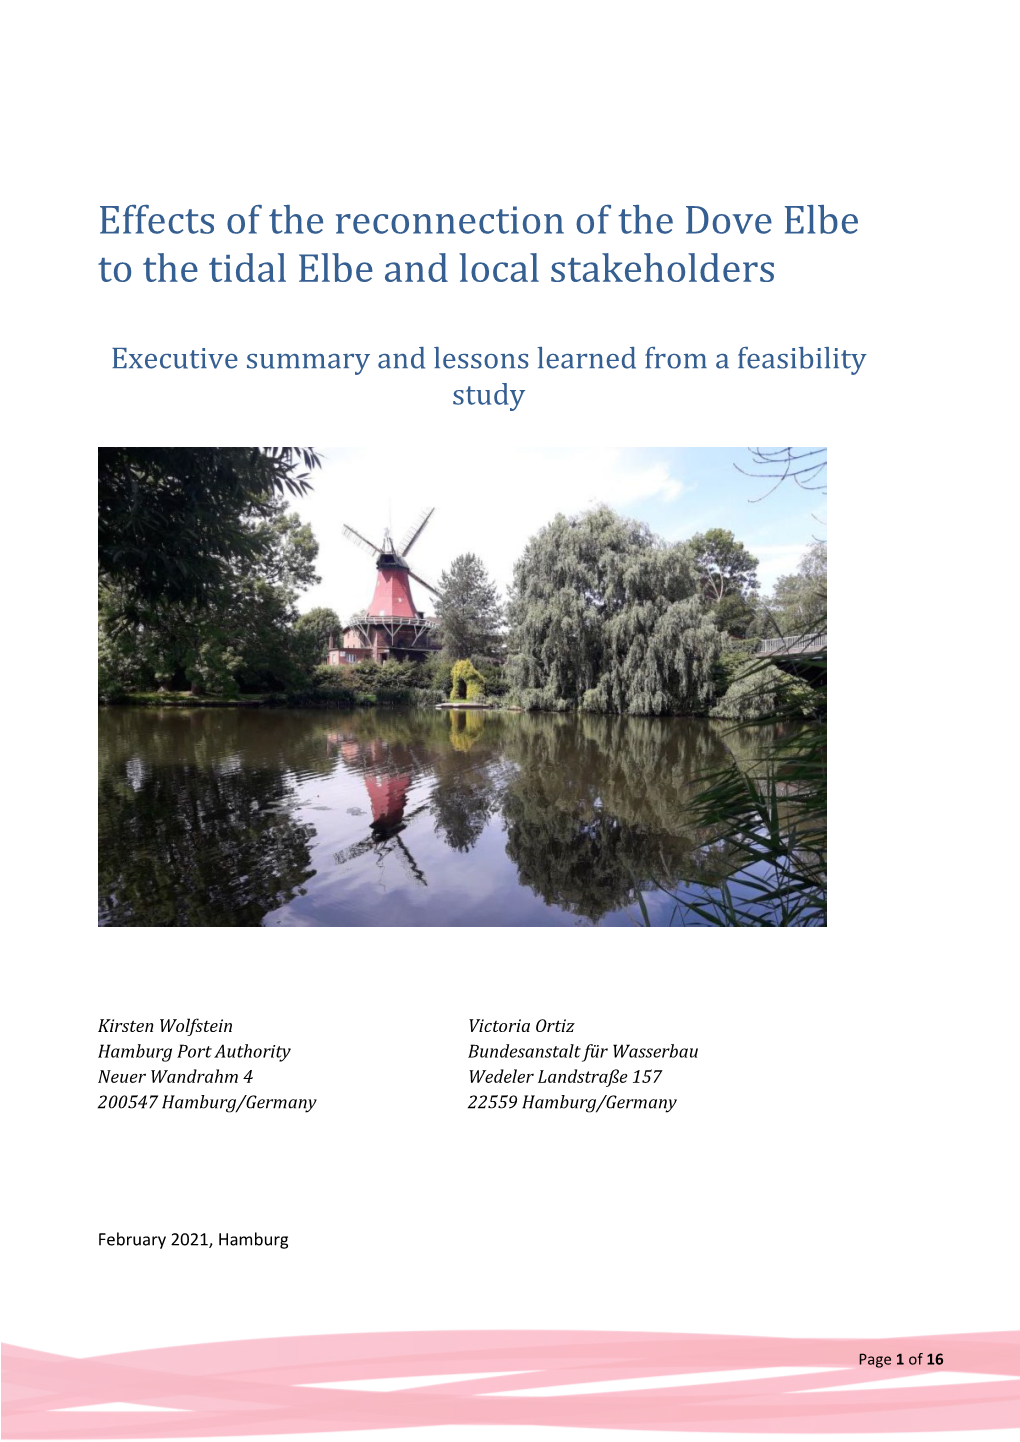 Effects of the Reconnection of the Dove Elbe to the Tidal Elbe and Local Stakeholders